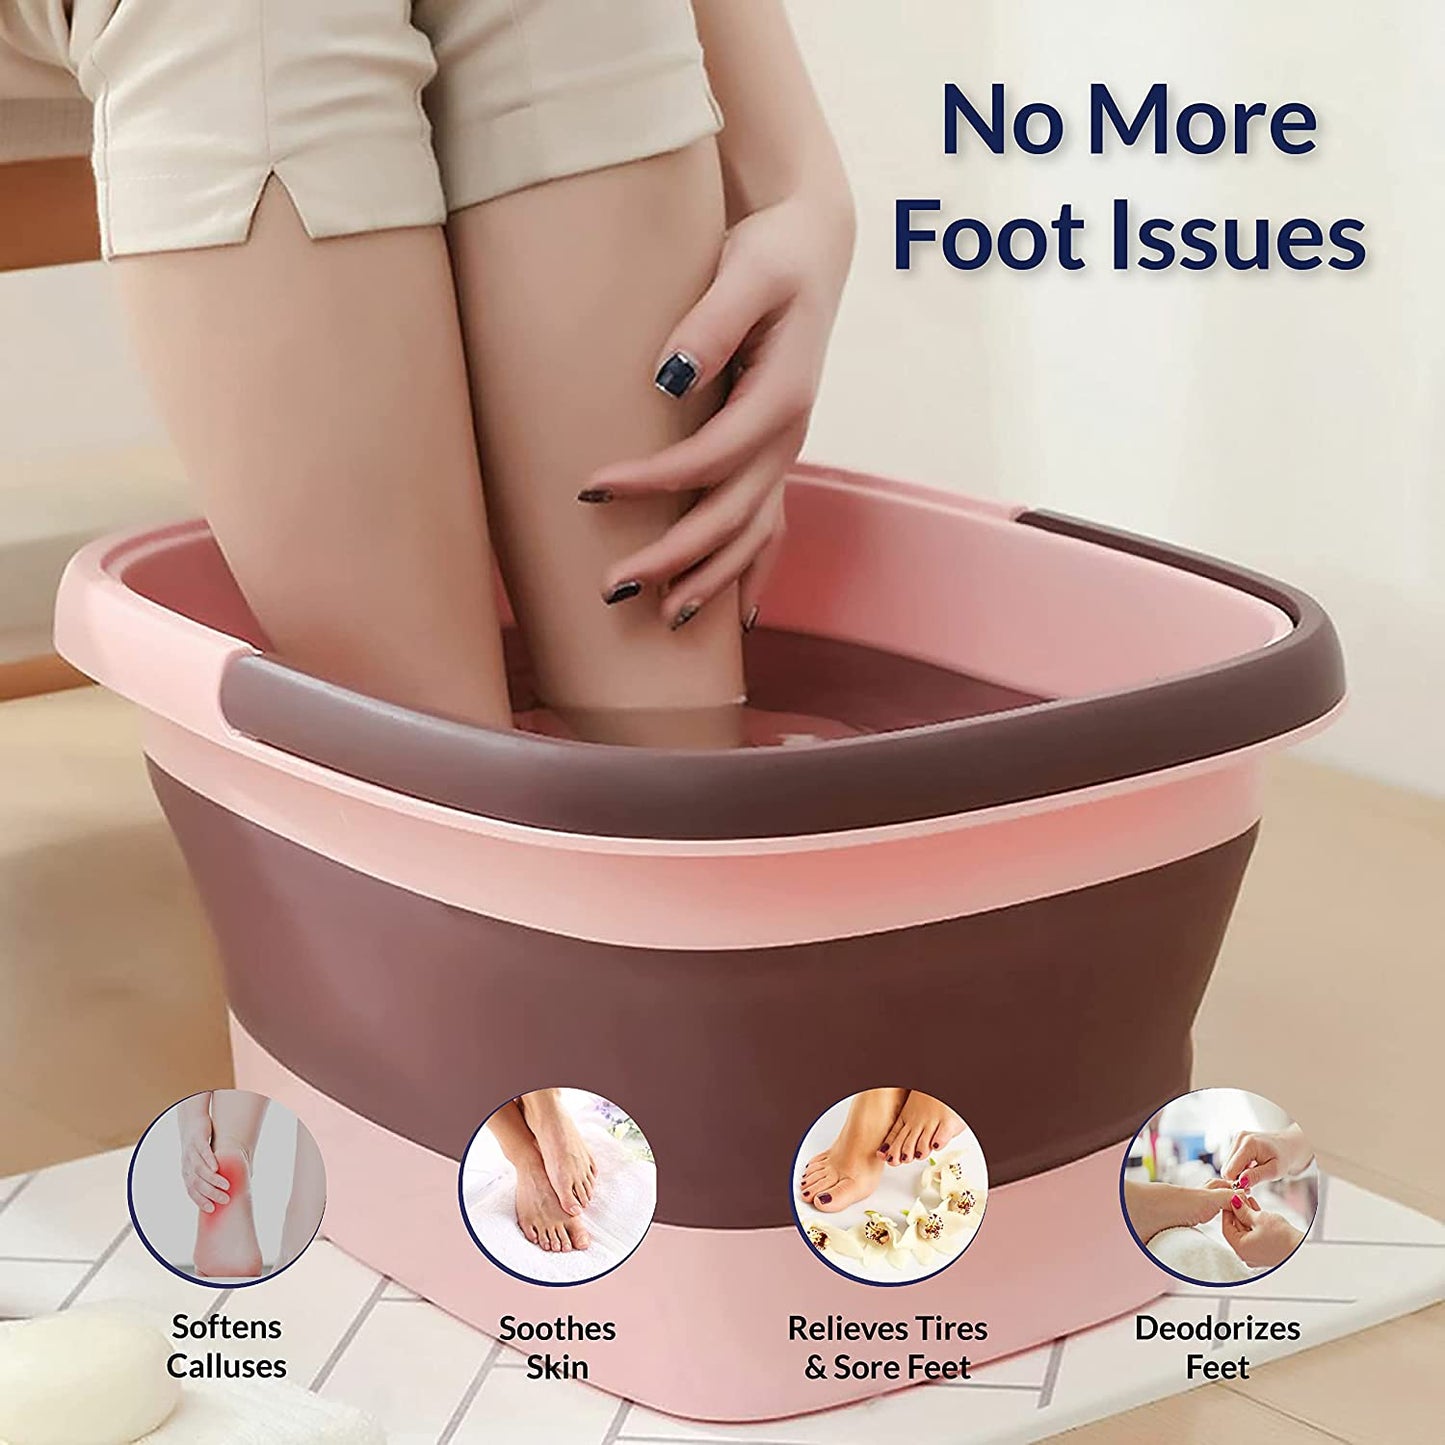 AWA Collapsible Foot Bath with Acupressure Points, Sturdy & Easy to Store Multi-Use Foldable Bucket for Soaking Feet, Great for Relaxation and Pain Relief (Pink Foot Bath Basin)